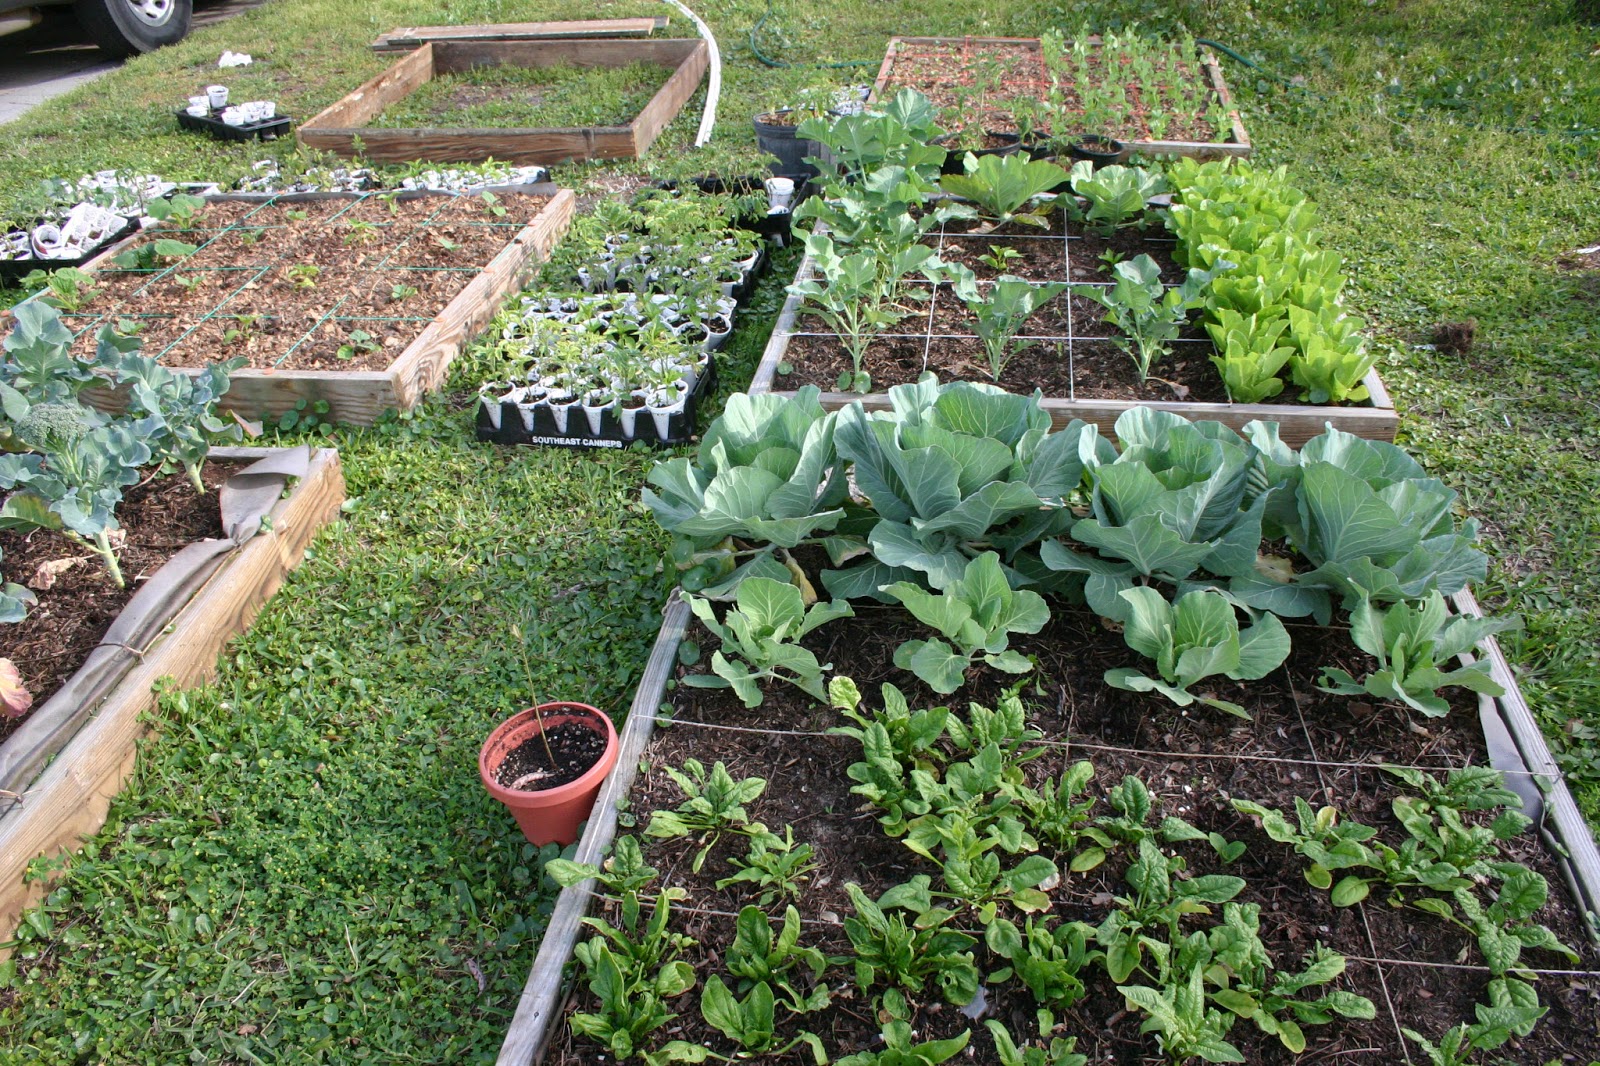 Homestead Life: How To Build a Square Foot Garden